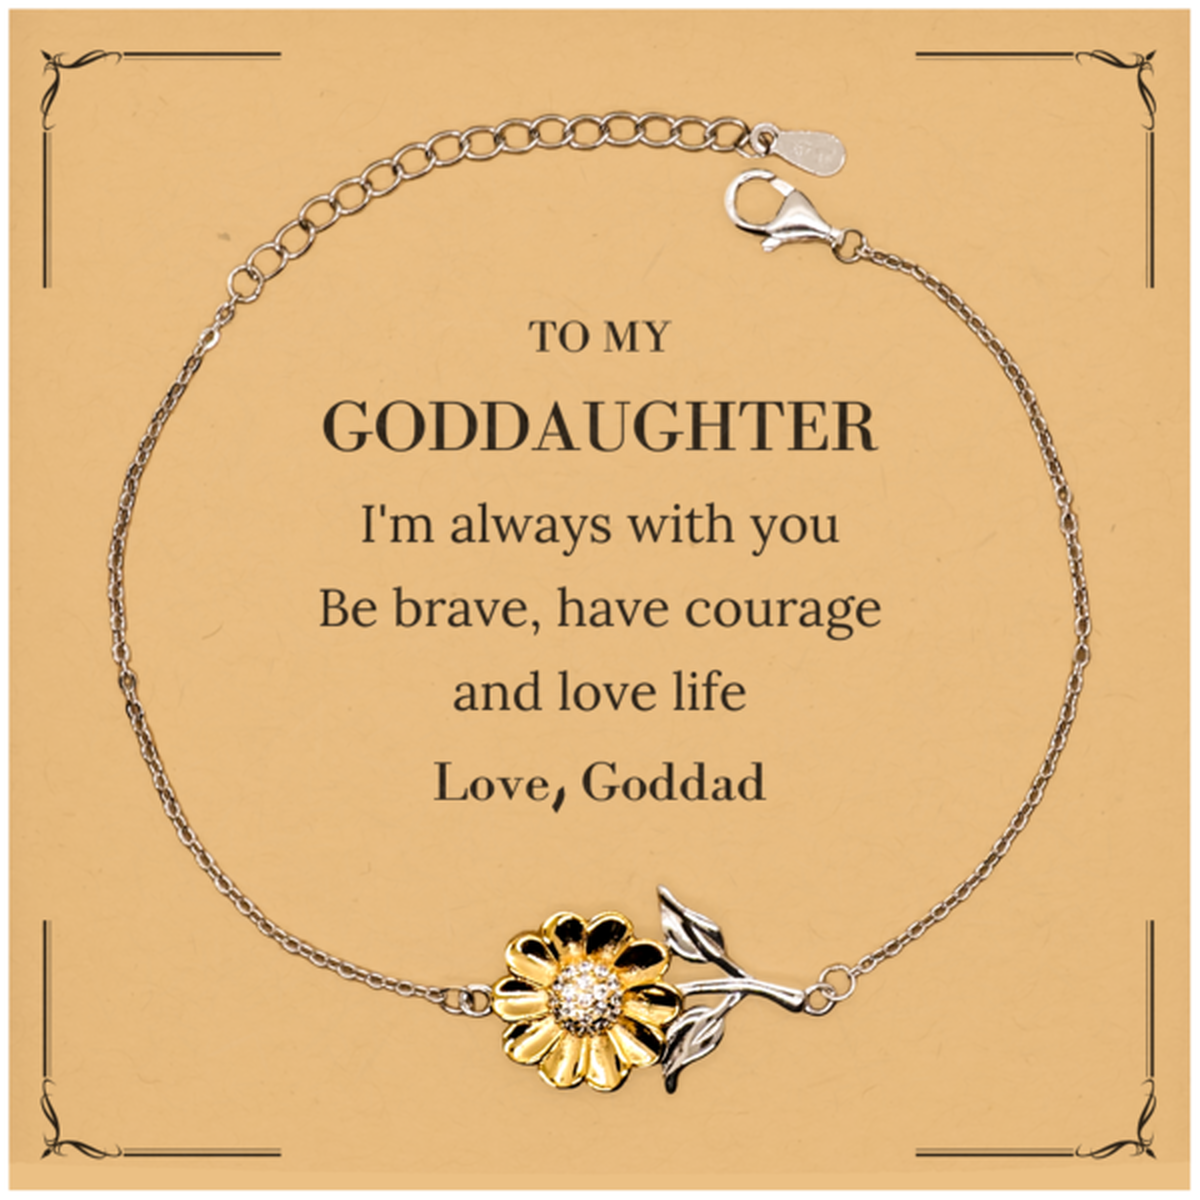 To My Goddaughter Gifts from Goddad, Unique Sunflower Bracelet Inspirational Christmas Birthday Graduation Gifts for Goddaughter I'm always with you. Be brave, have courage and love life. Love, Goddad